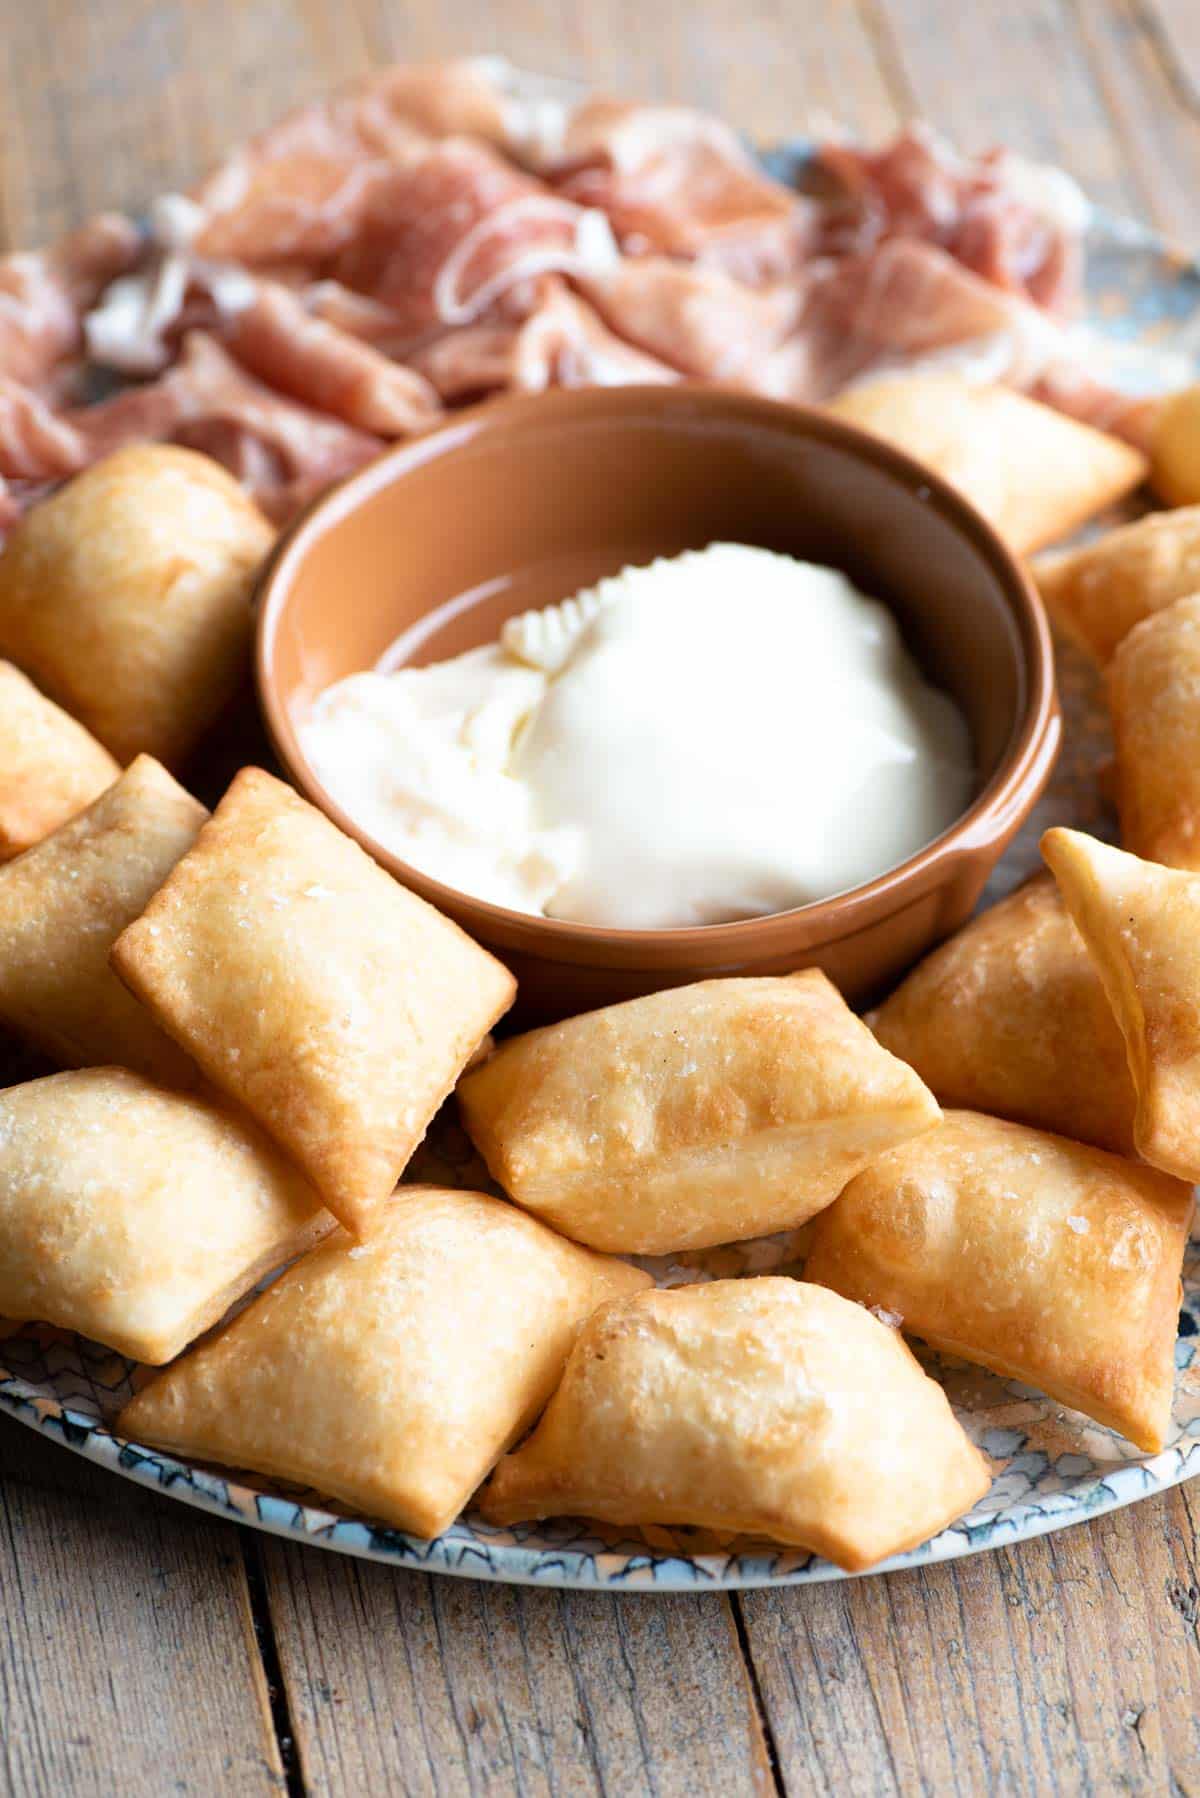 Gnocco Fritto (Italian fried dough) on a plate with cheese and prosciutto.